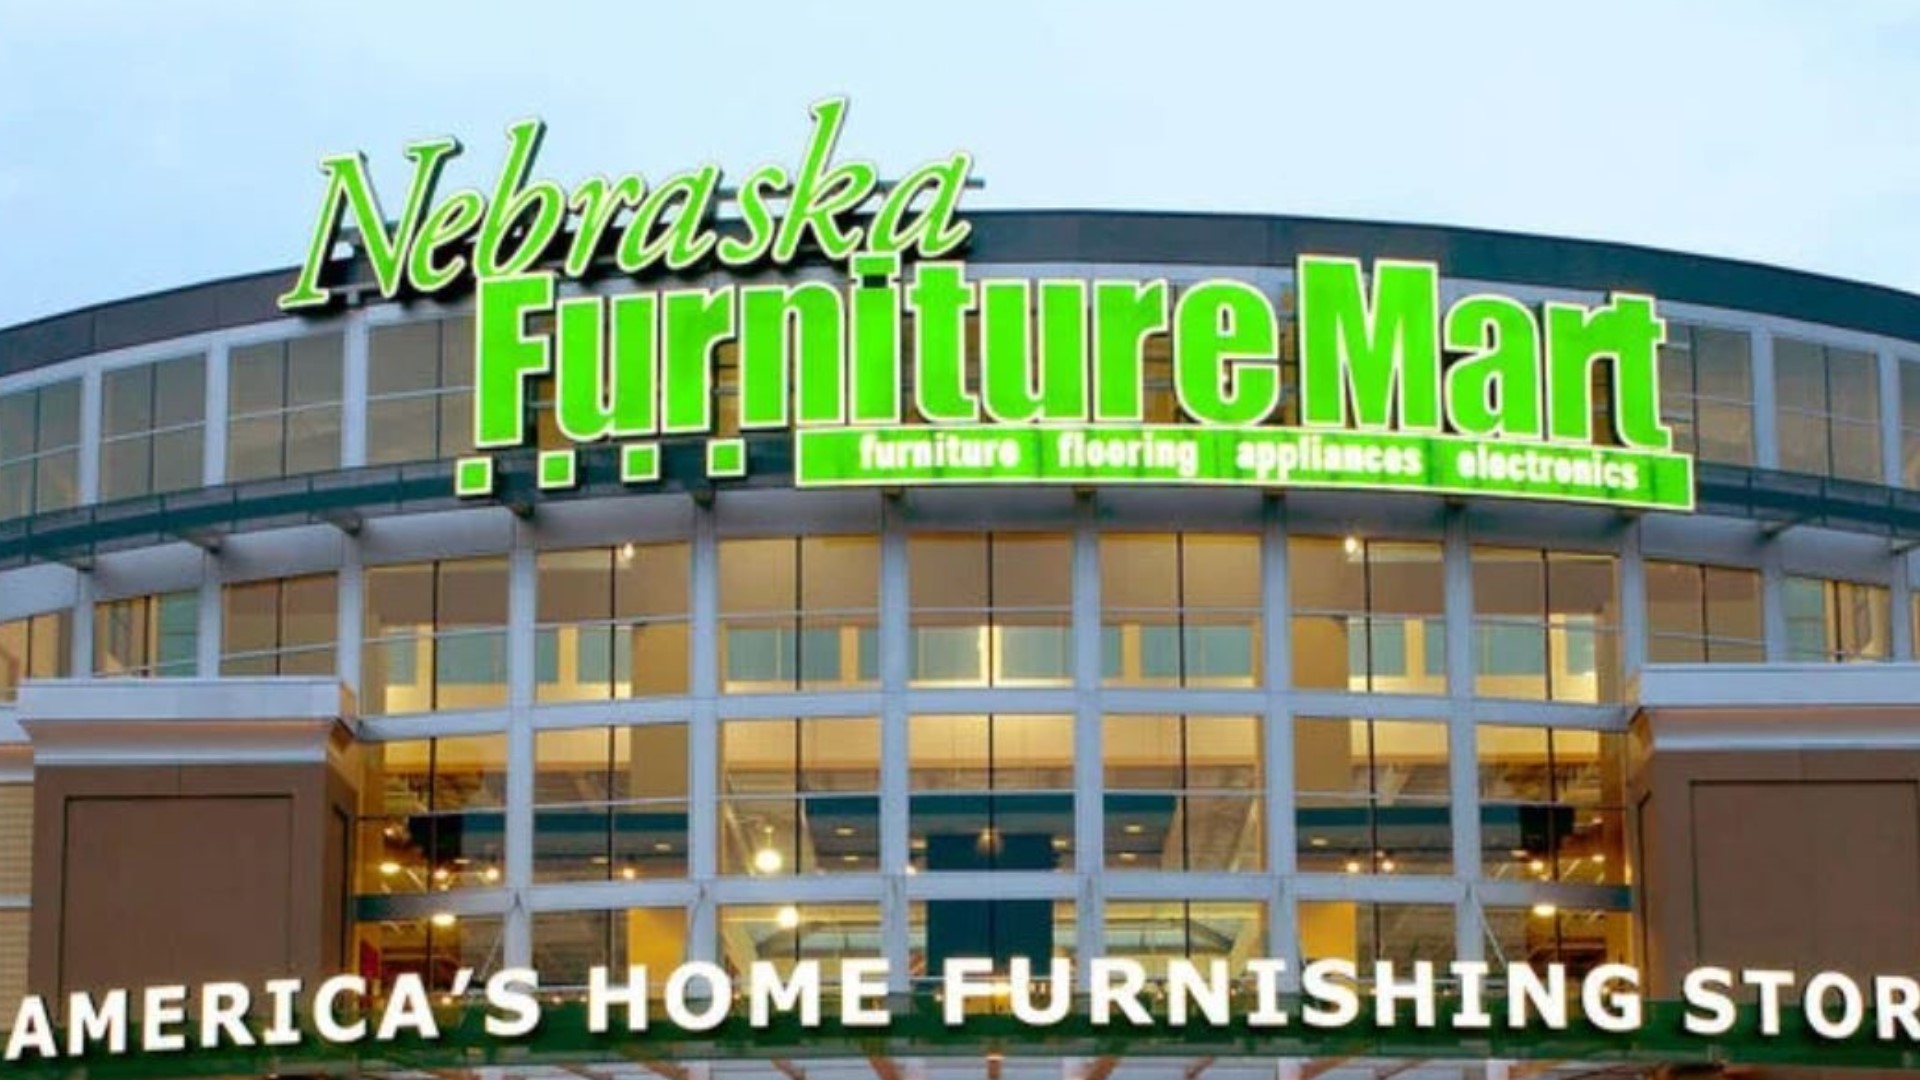 Nebraska Furniture Mart is officially opening its second location in Texas.